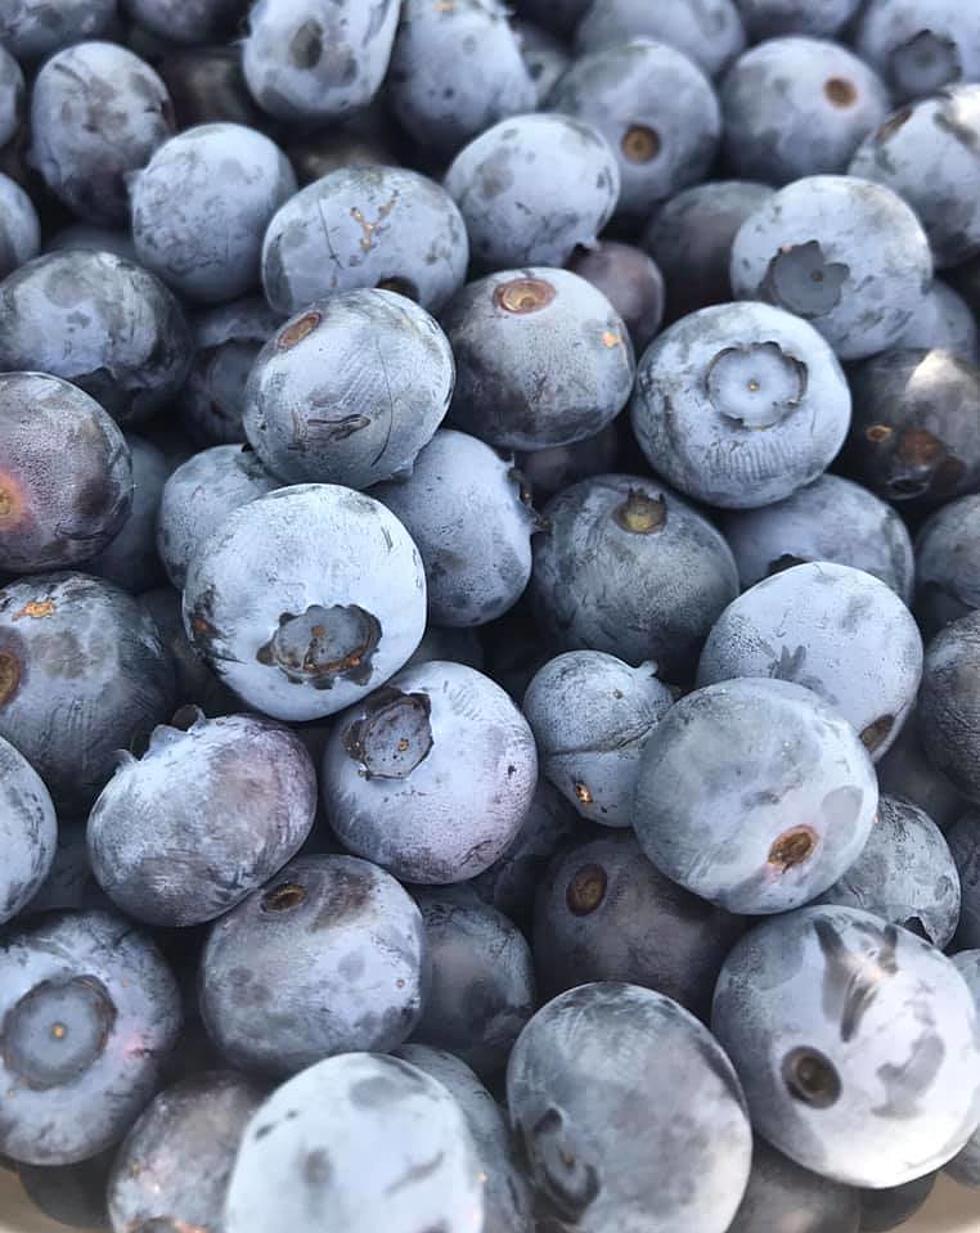 Family-Owned Daviess County Blueberry Farm Has Reopened For The Summer (PHOTOS)